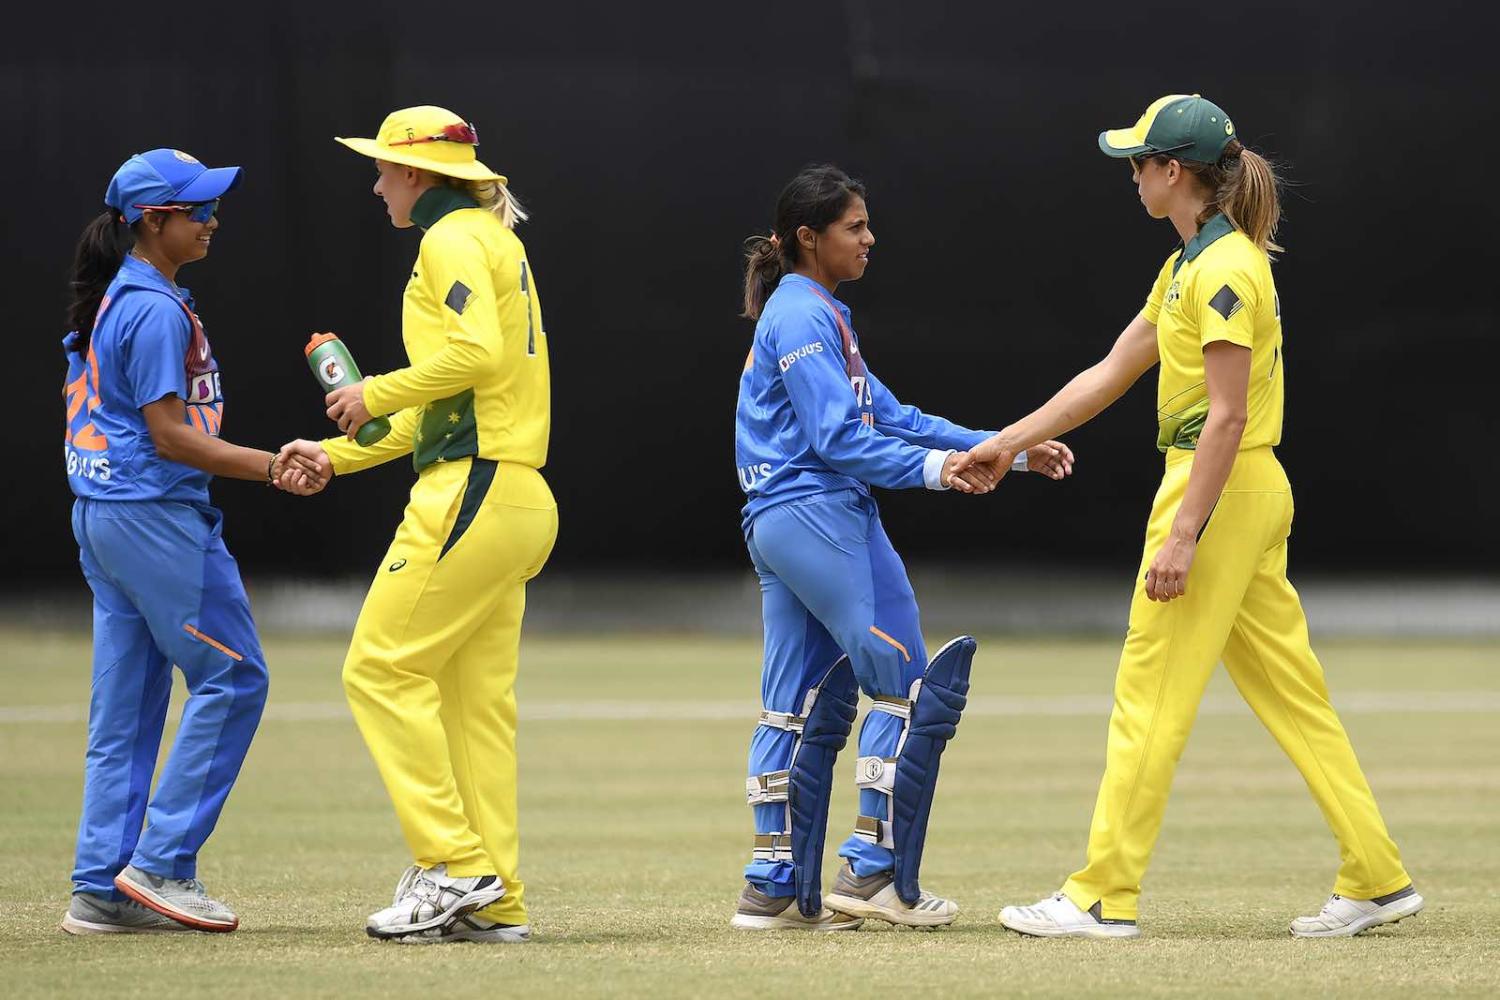 Players shake hands after a Women's T20 match between Australia A and India A last month on the Gold Coast, Australia (Photo: Albert Perez/Getty Images)